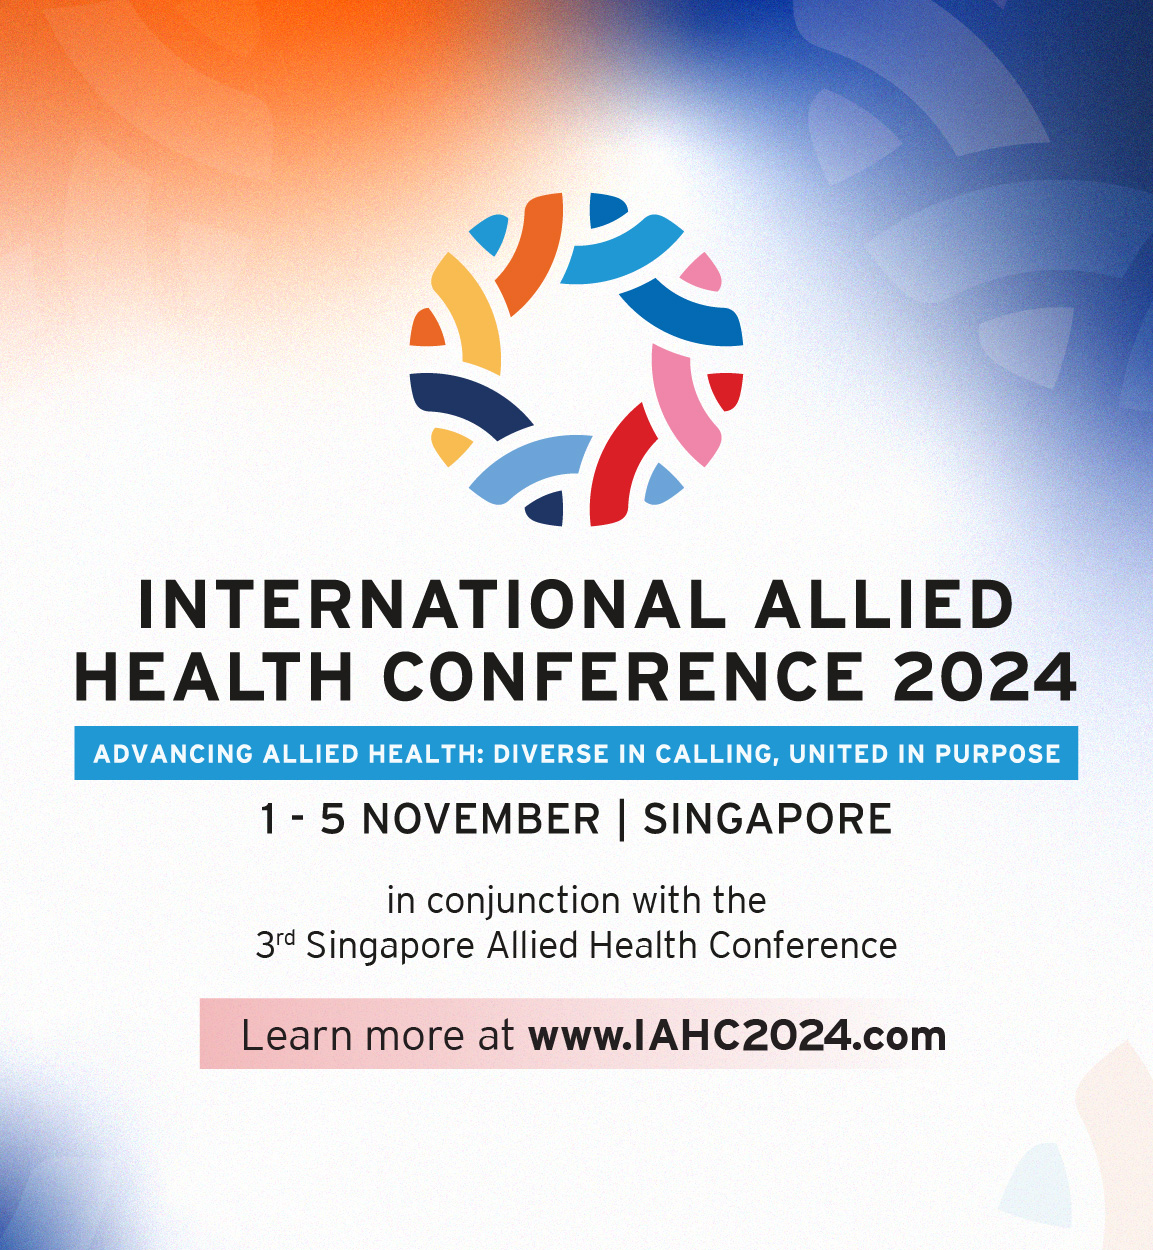 International Allied Health Conference 2024